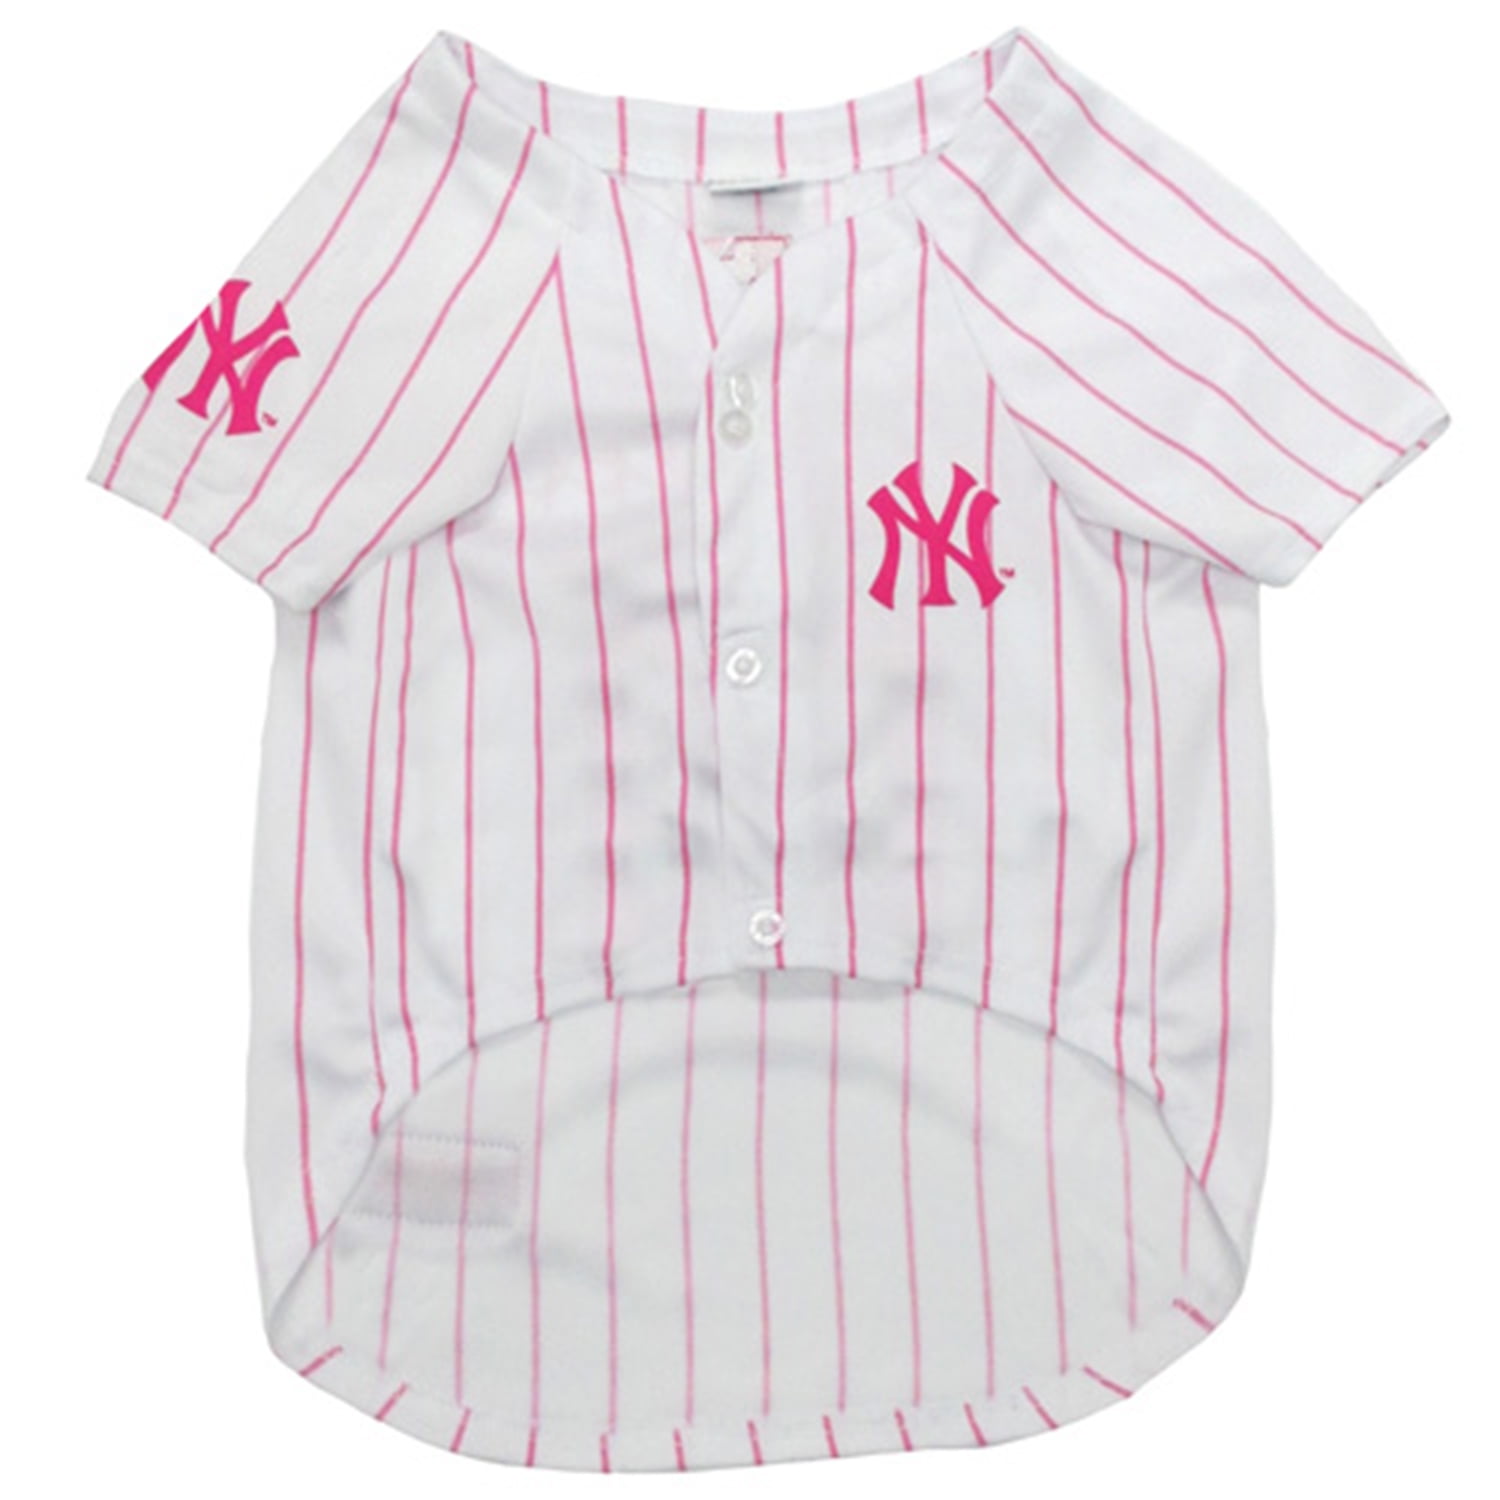 MLB Jersey for Dogs - Washington Nationals Pink Jersey, Medium. Cute Pink  Outfit for Pets